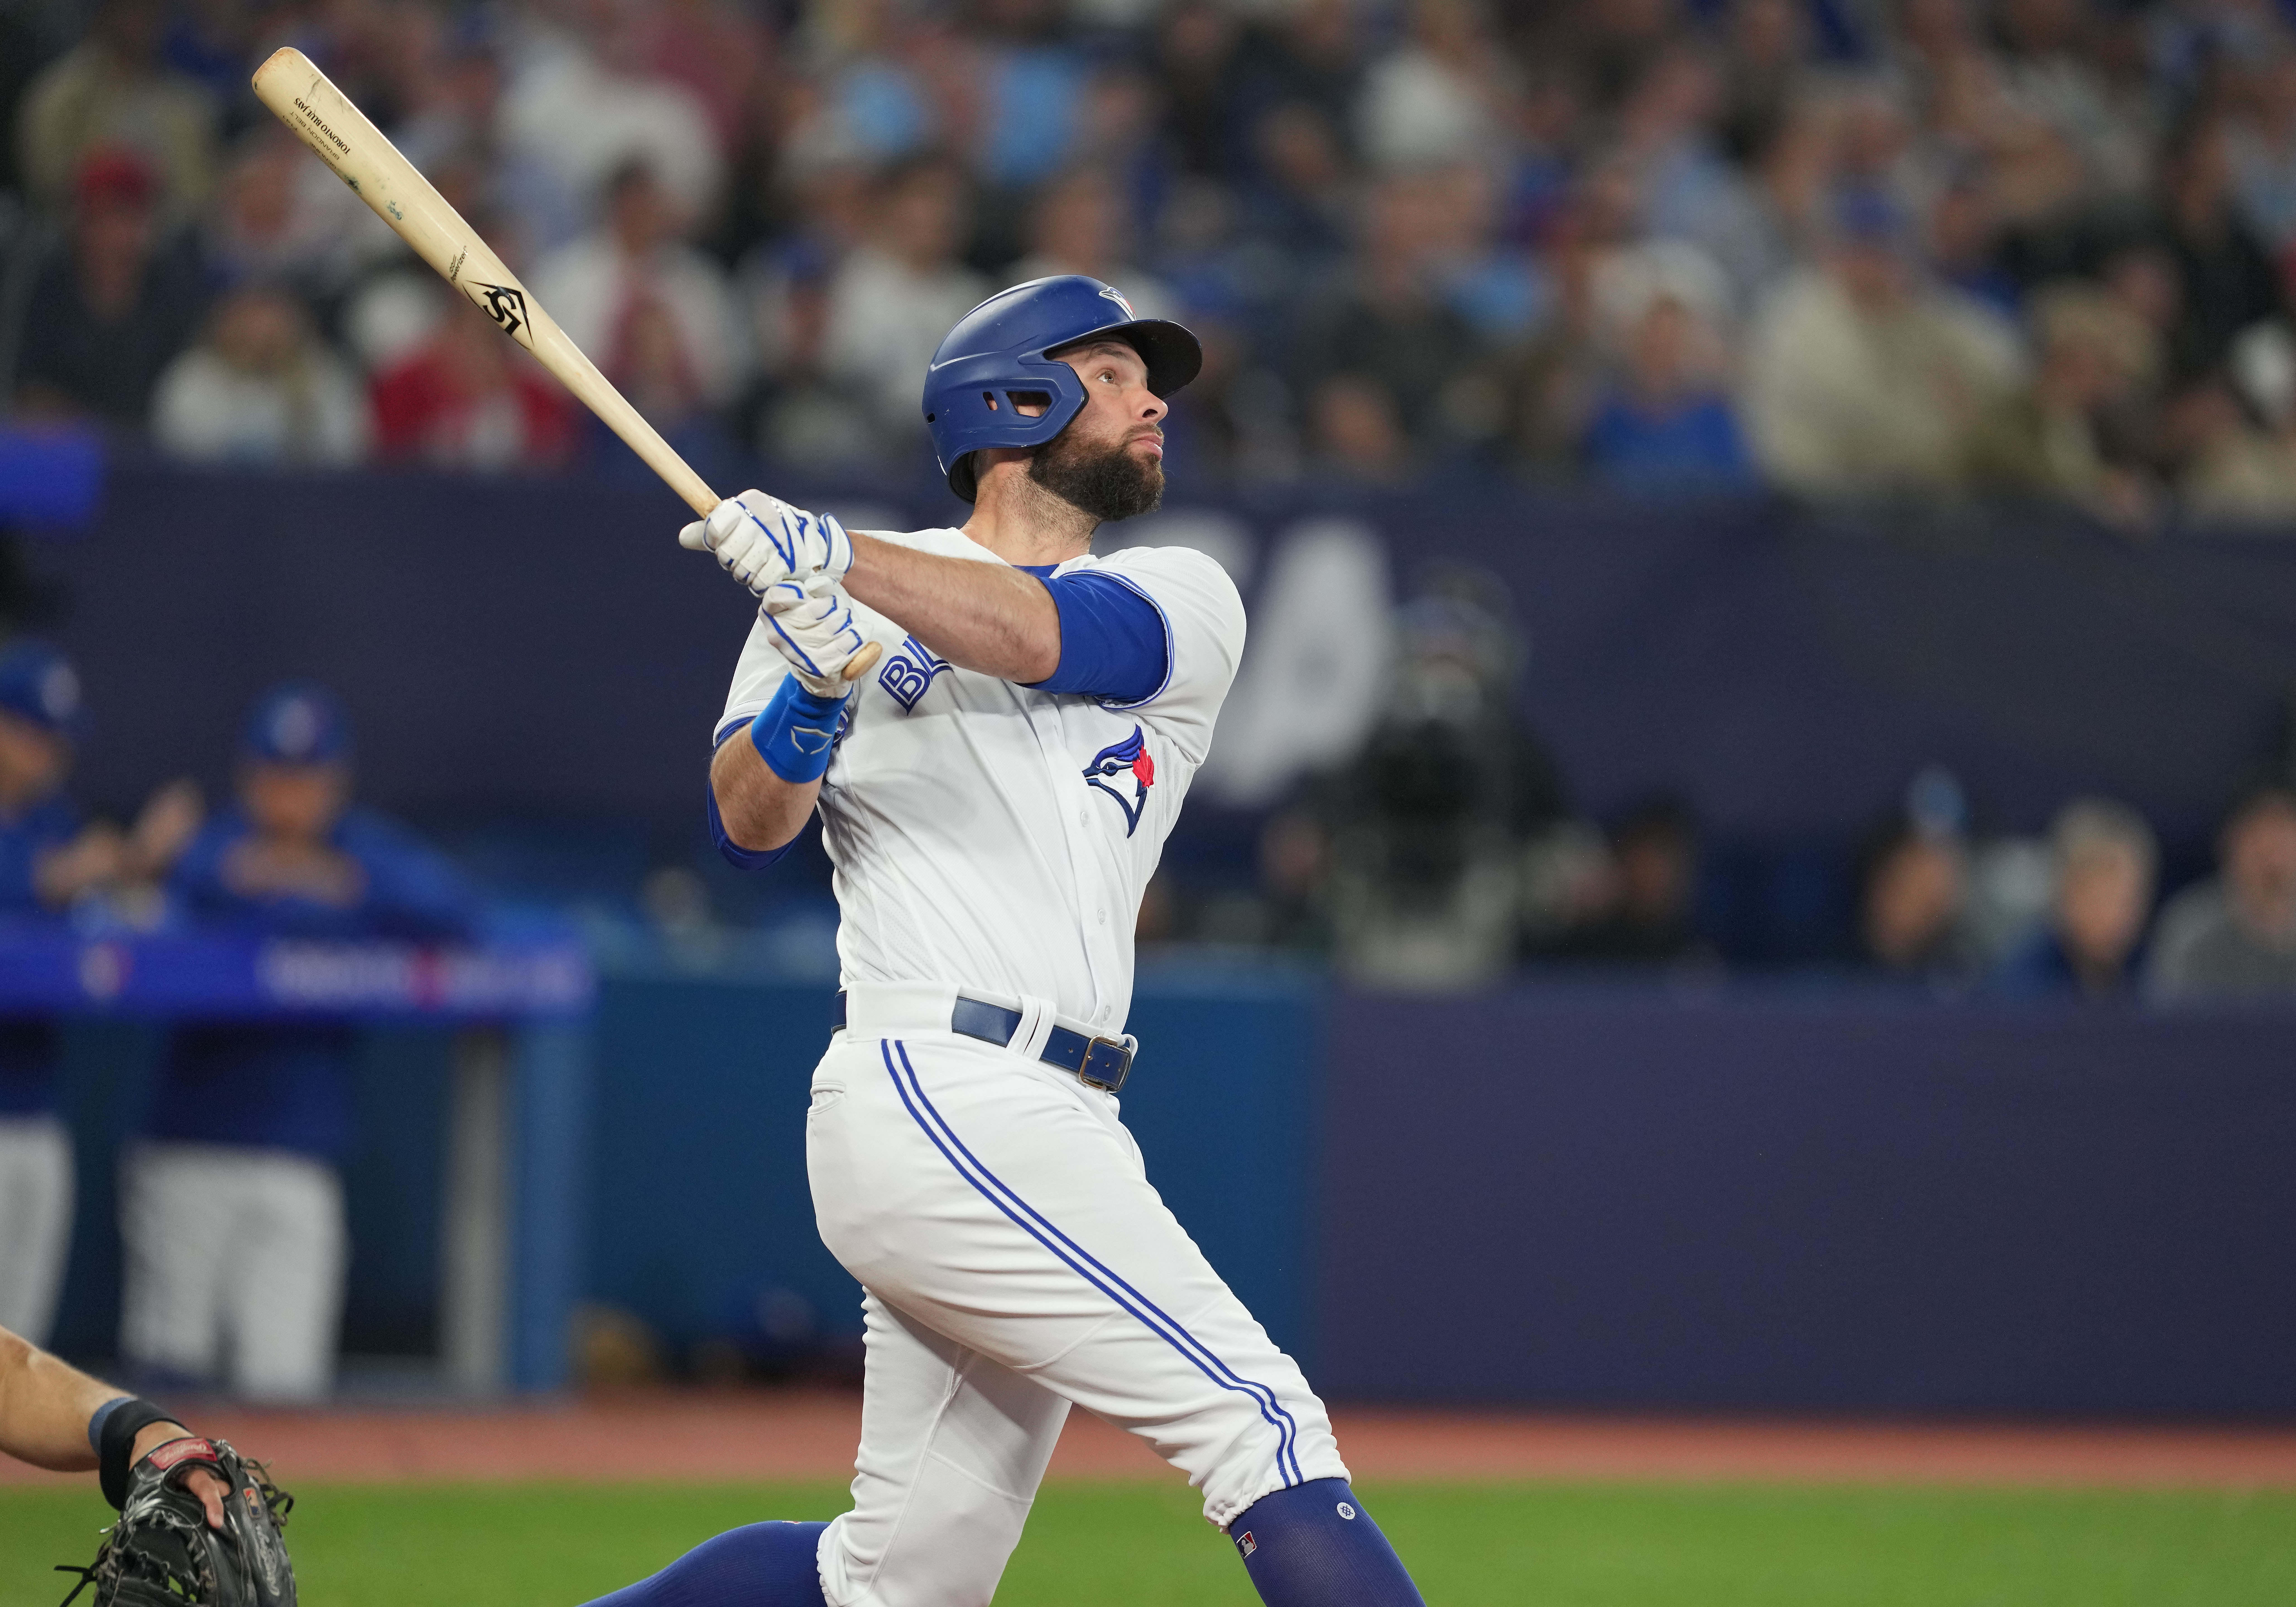 What's sustainable (and what's not) about the Blue Jays' early success?